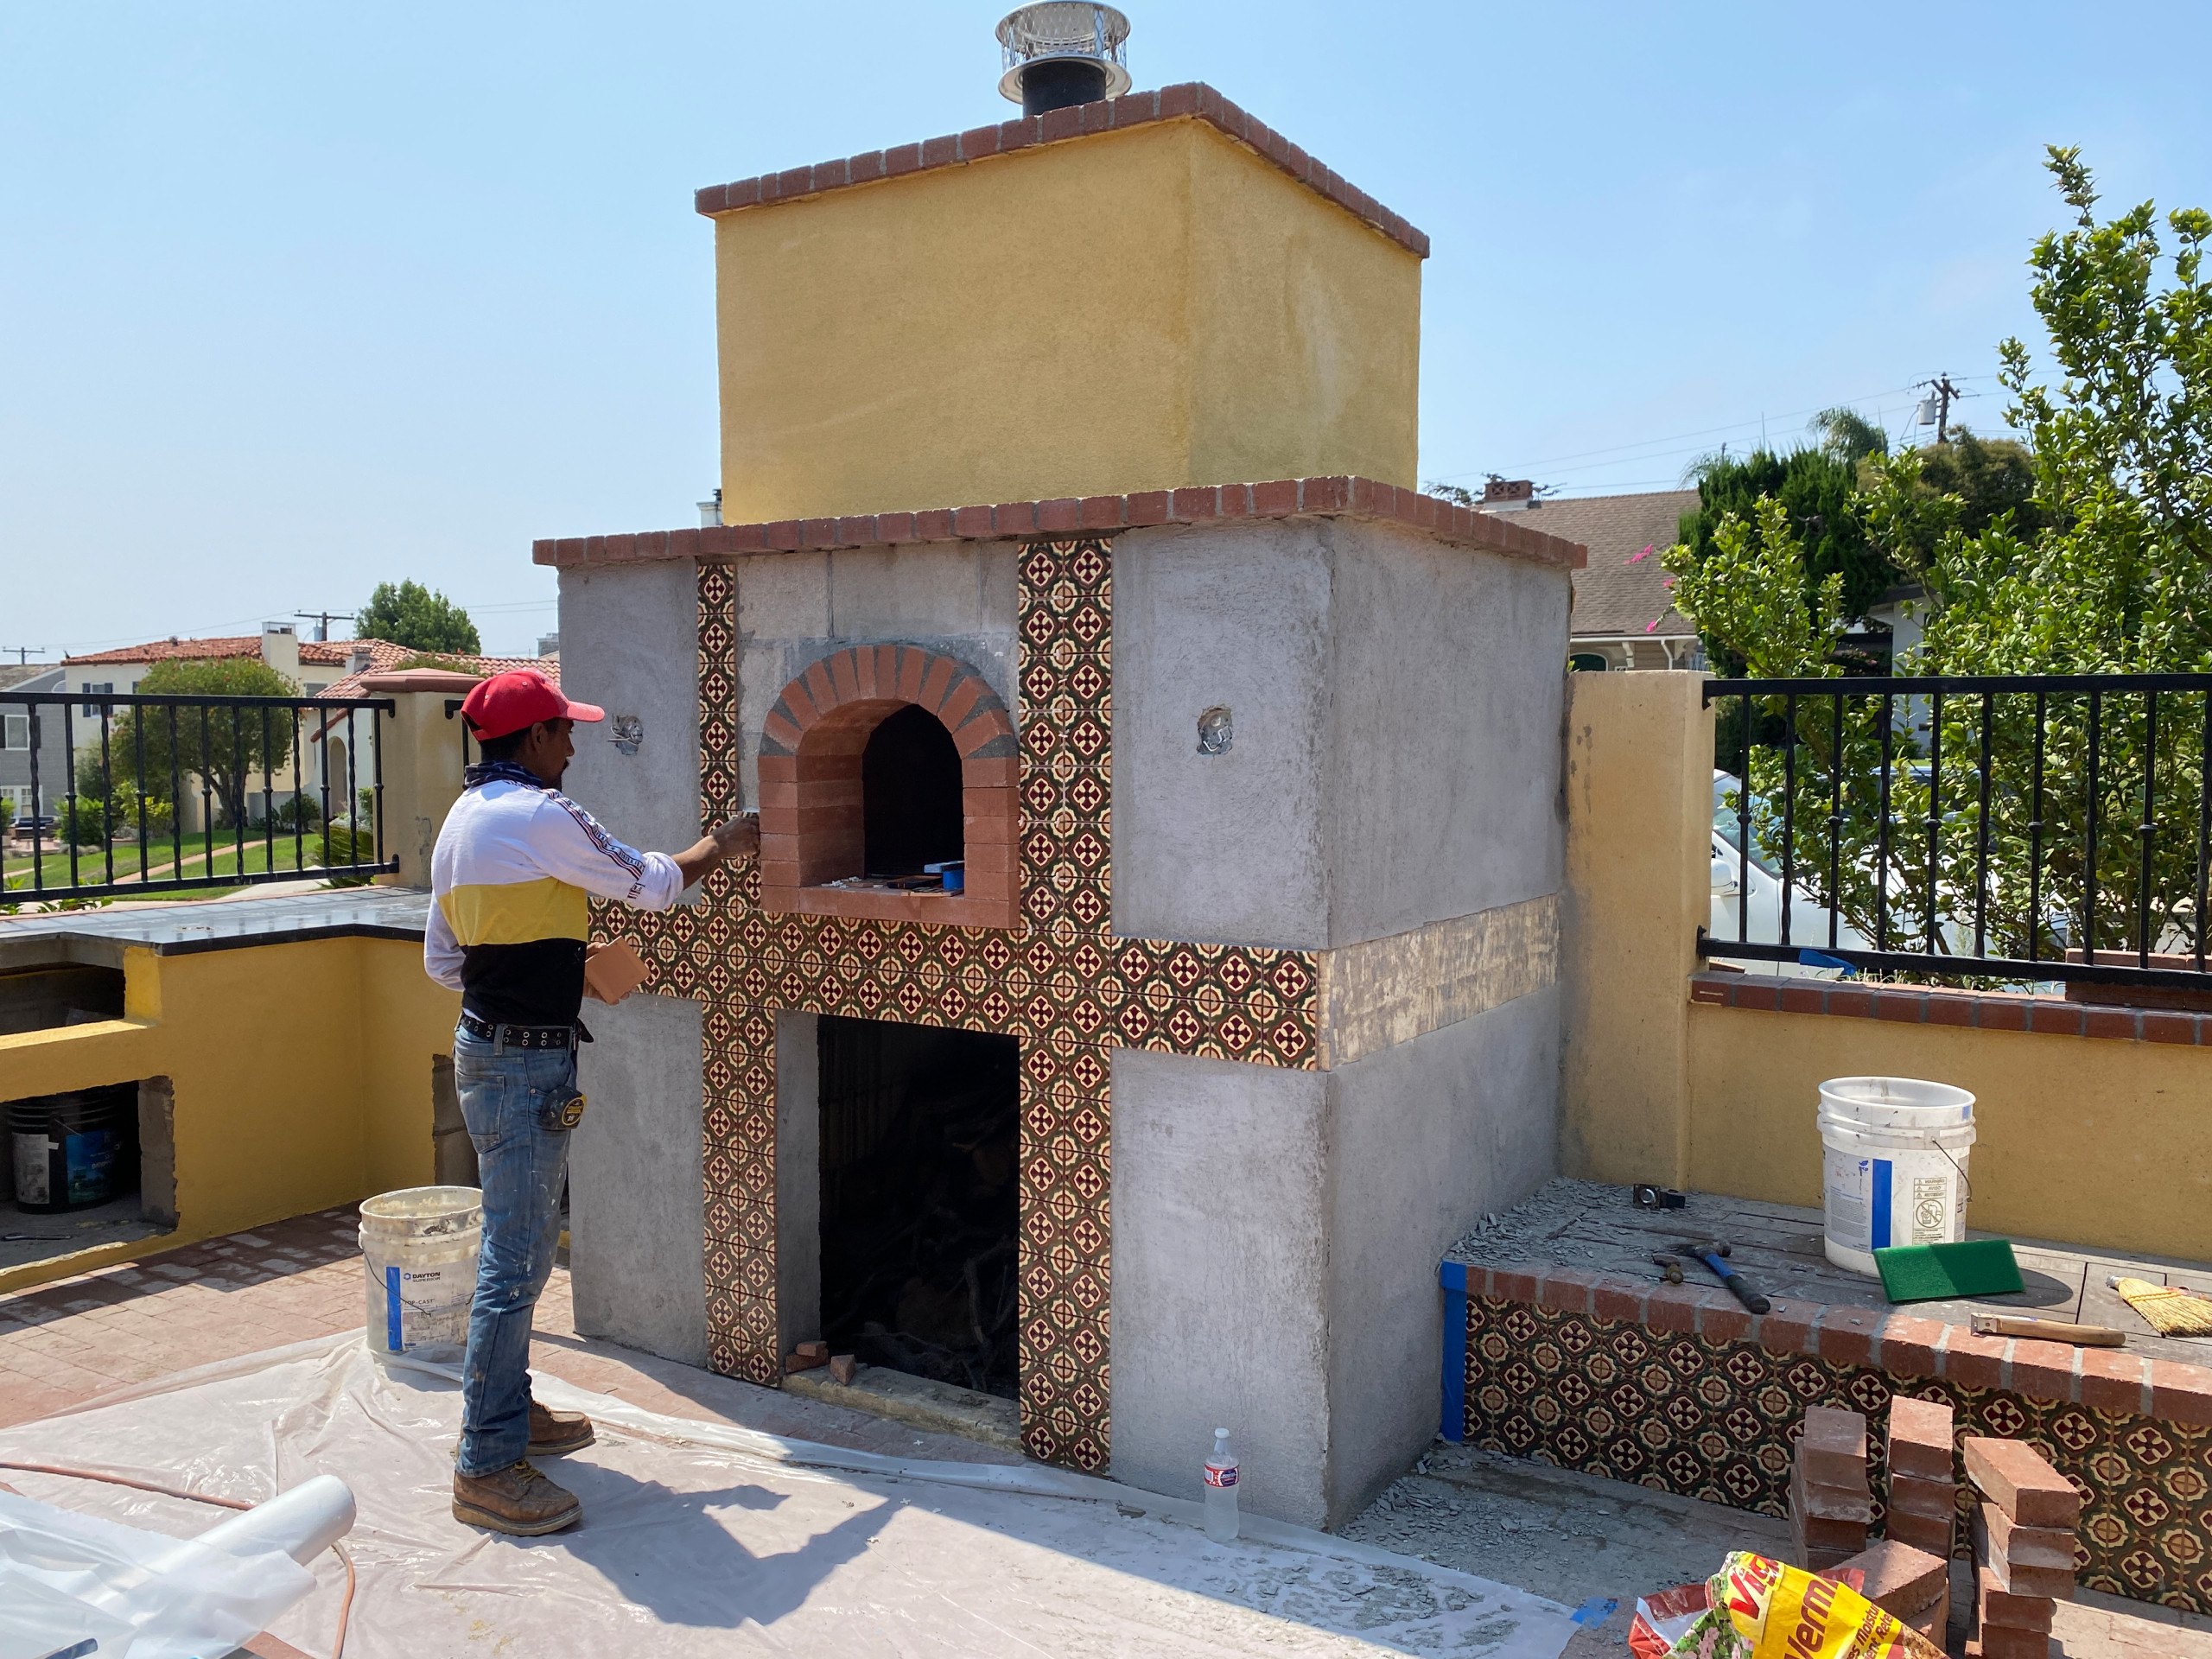 Building a Wood Fired Pizza Oven in Point Loma